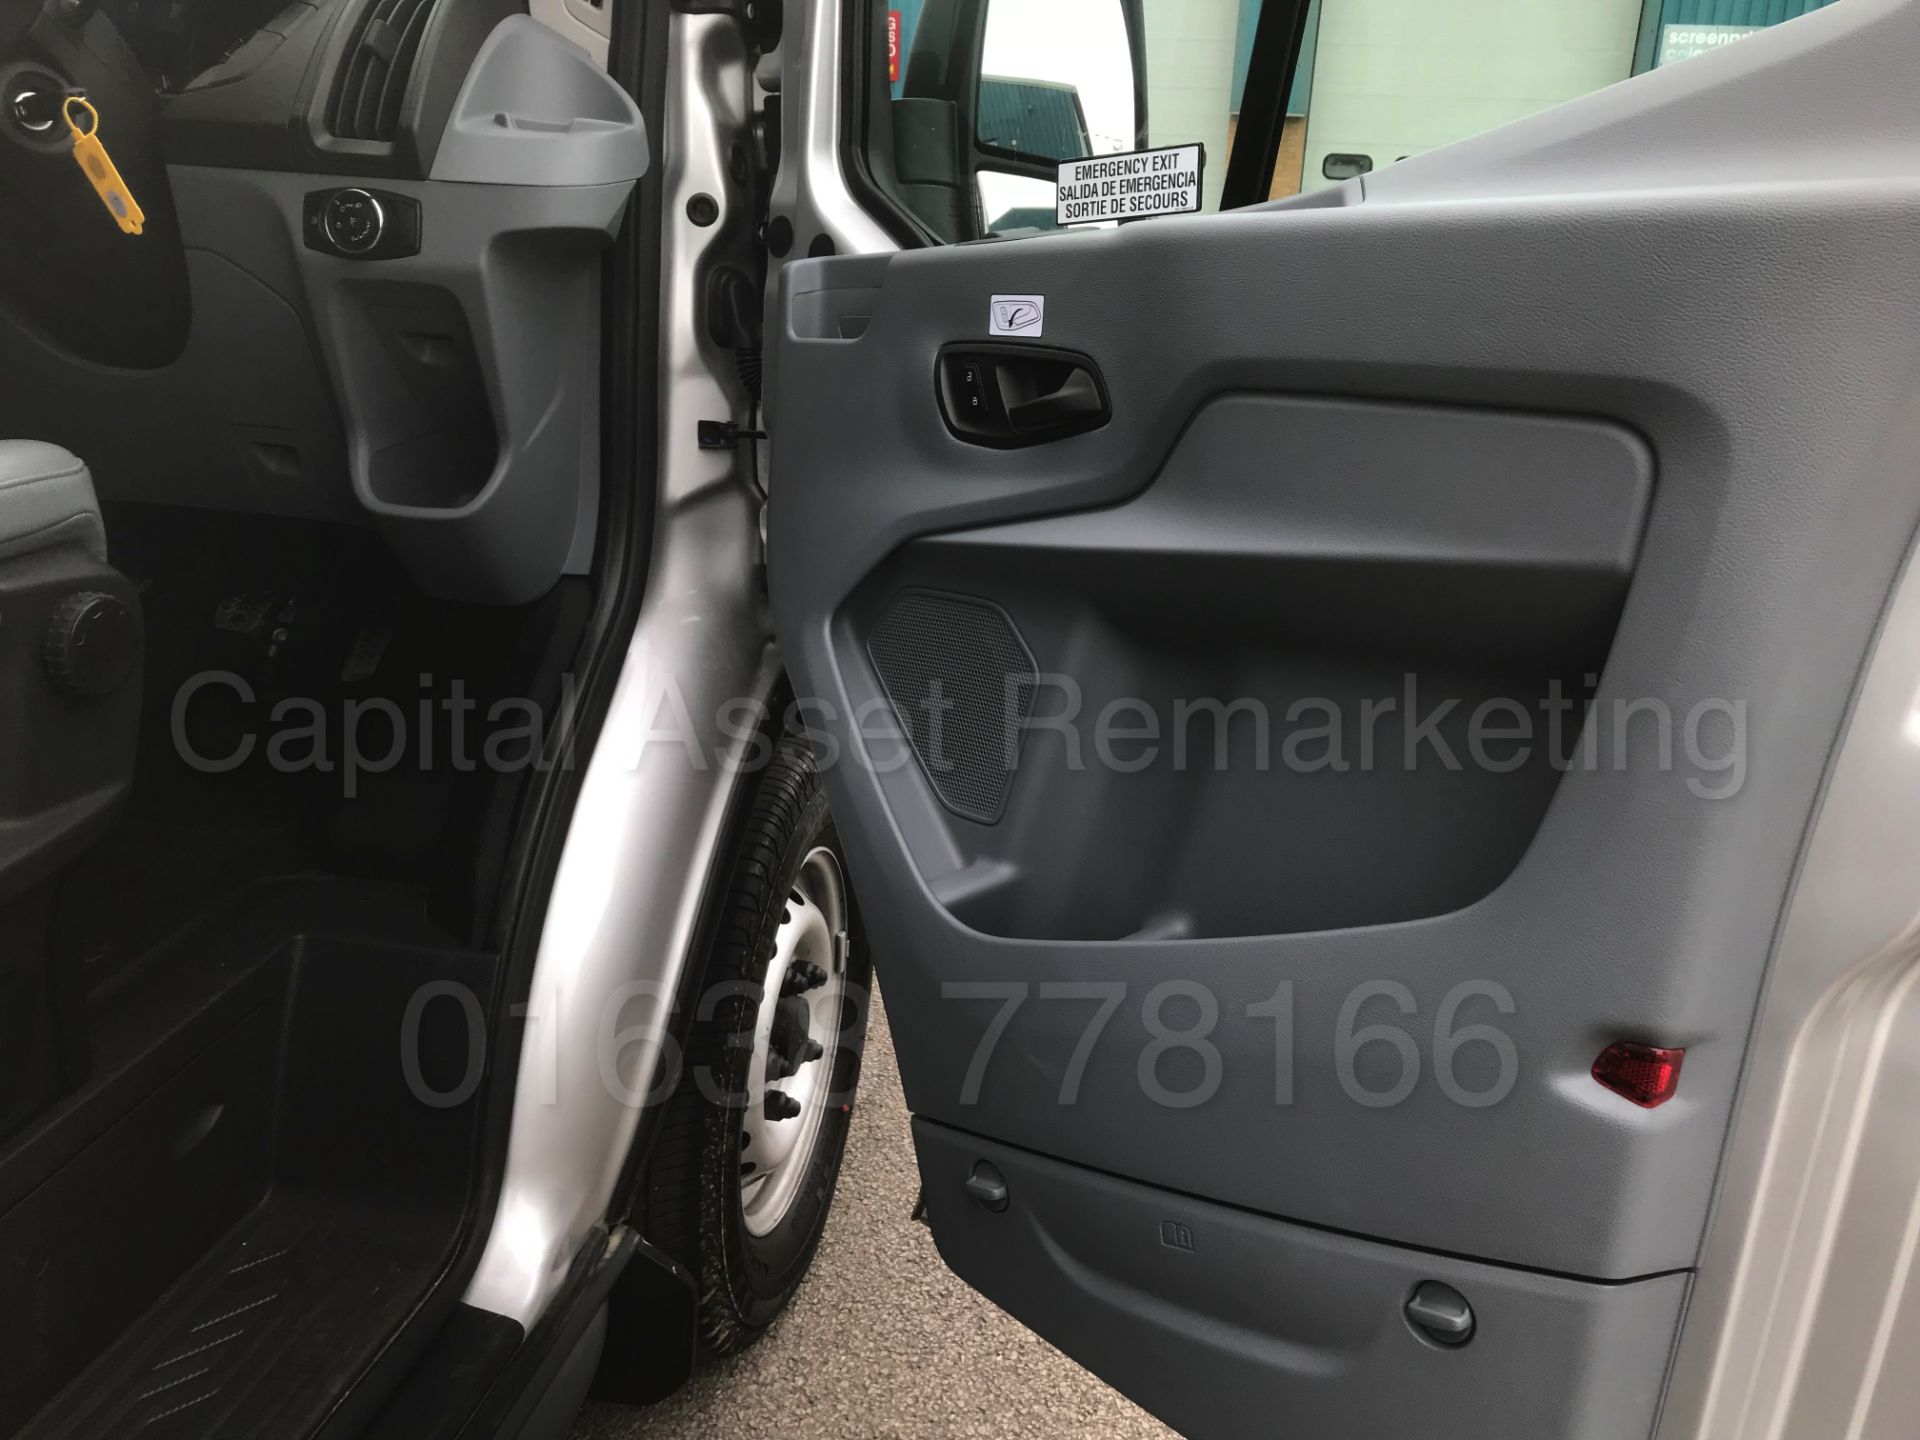 (On Sale) FORD TRANSIT LWB '15 SEATER MINI-BUS' (2018) '2.2 TDCI -125 BHP- 6 SPEED' 130 MILES ONLY ! - Image 40 of 50